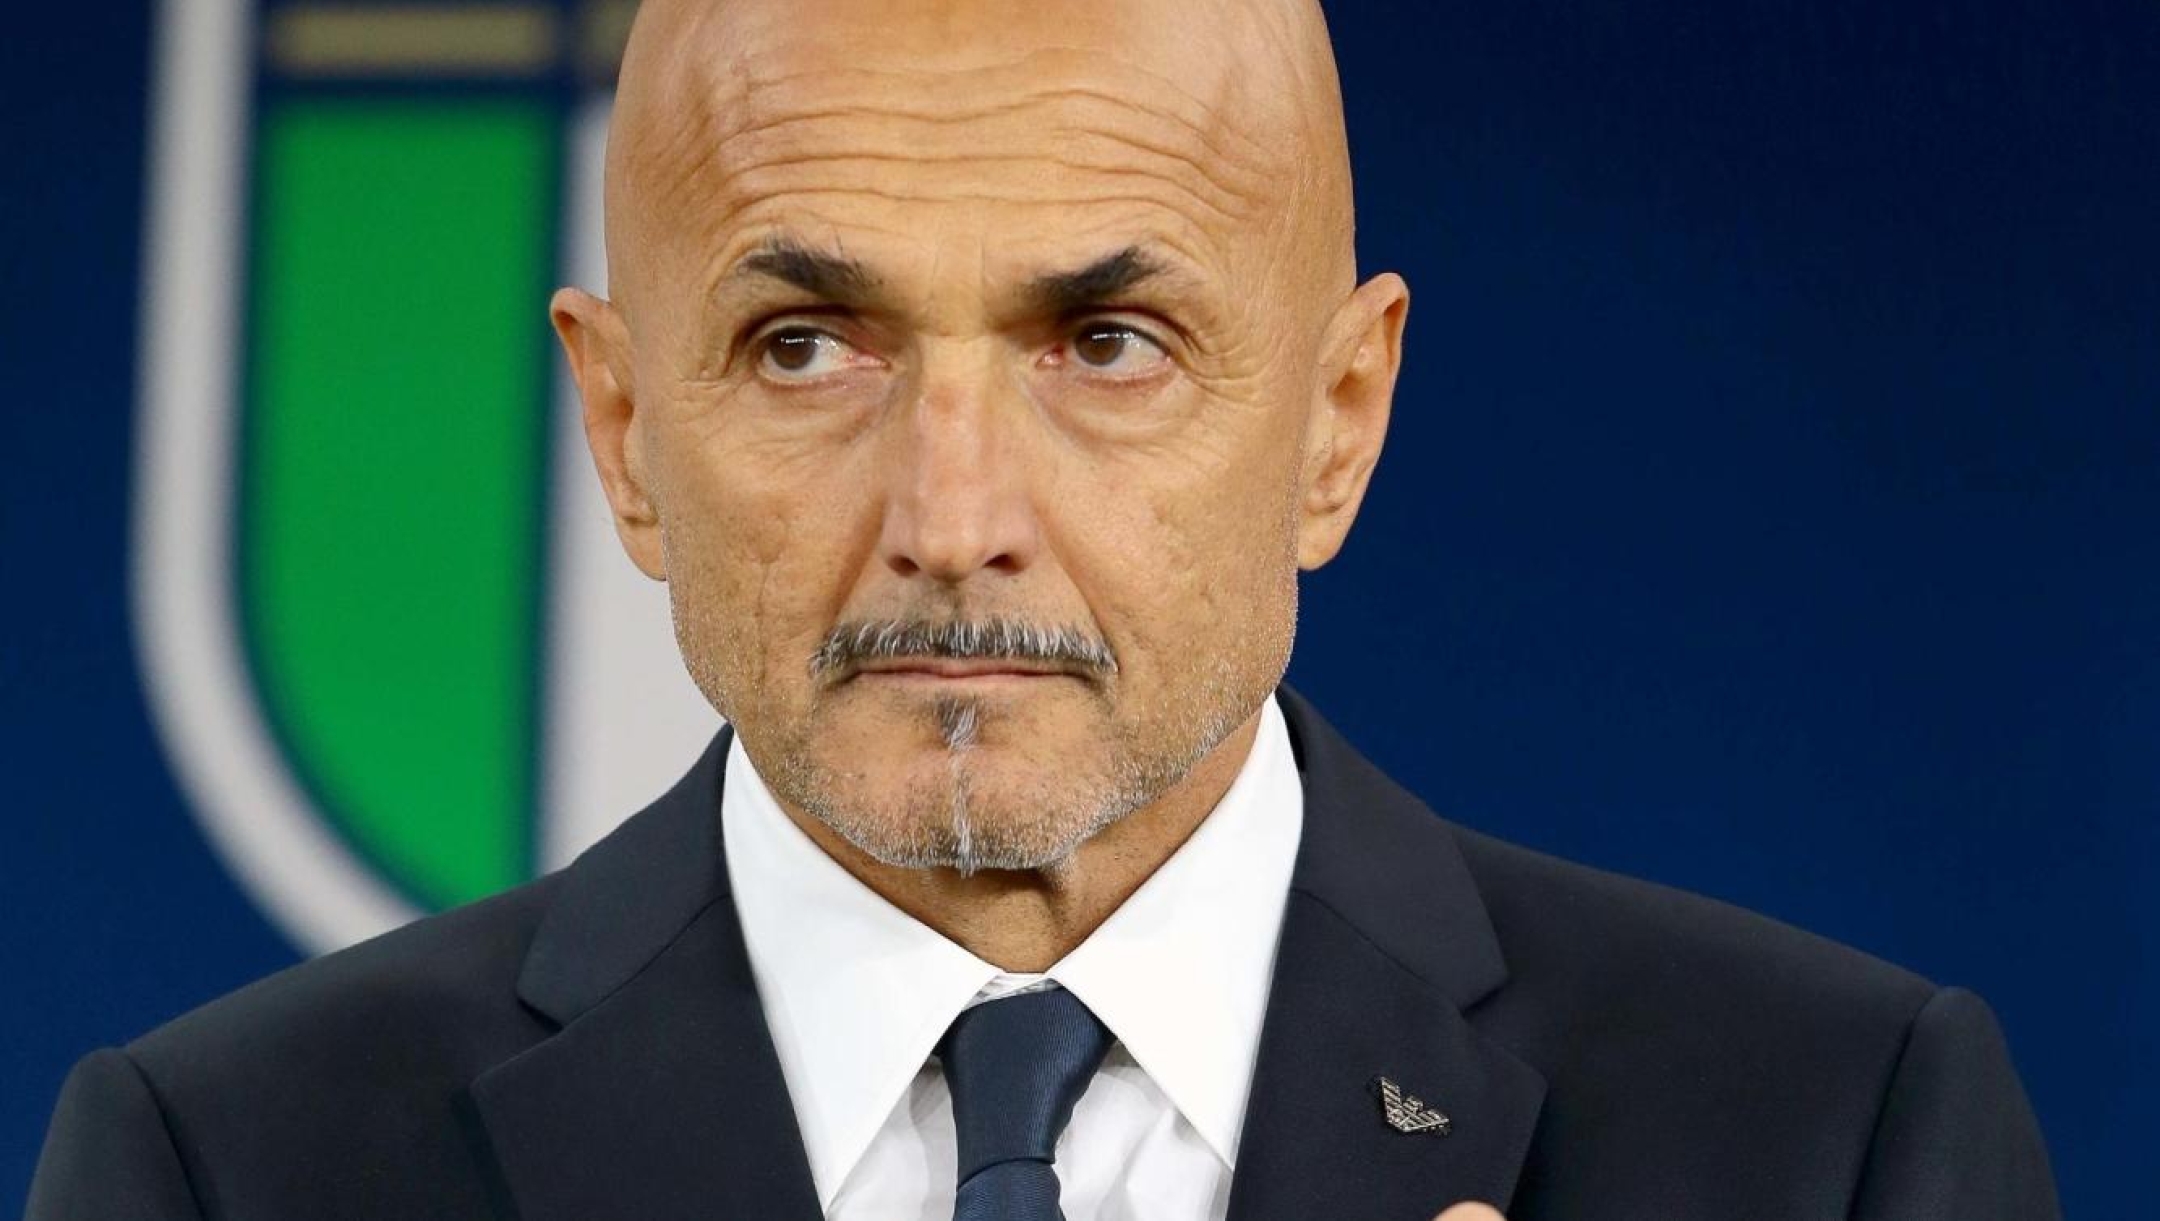 Italy's Head Coach Luciano Spalletti reacts during the UEFA EURO 2024 qualifying soccer match between Italy and Malta at the San Nicola stadium in Bari, Italy, 14 October 2023. ANSA/DONATO FASANO